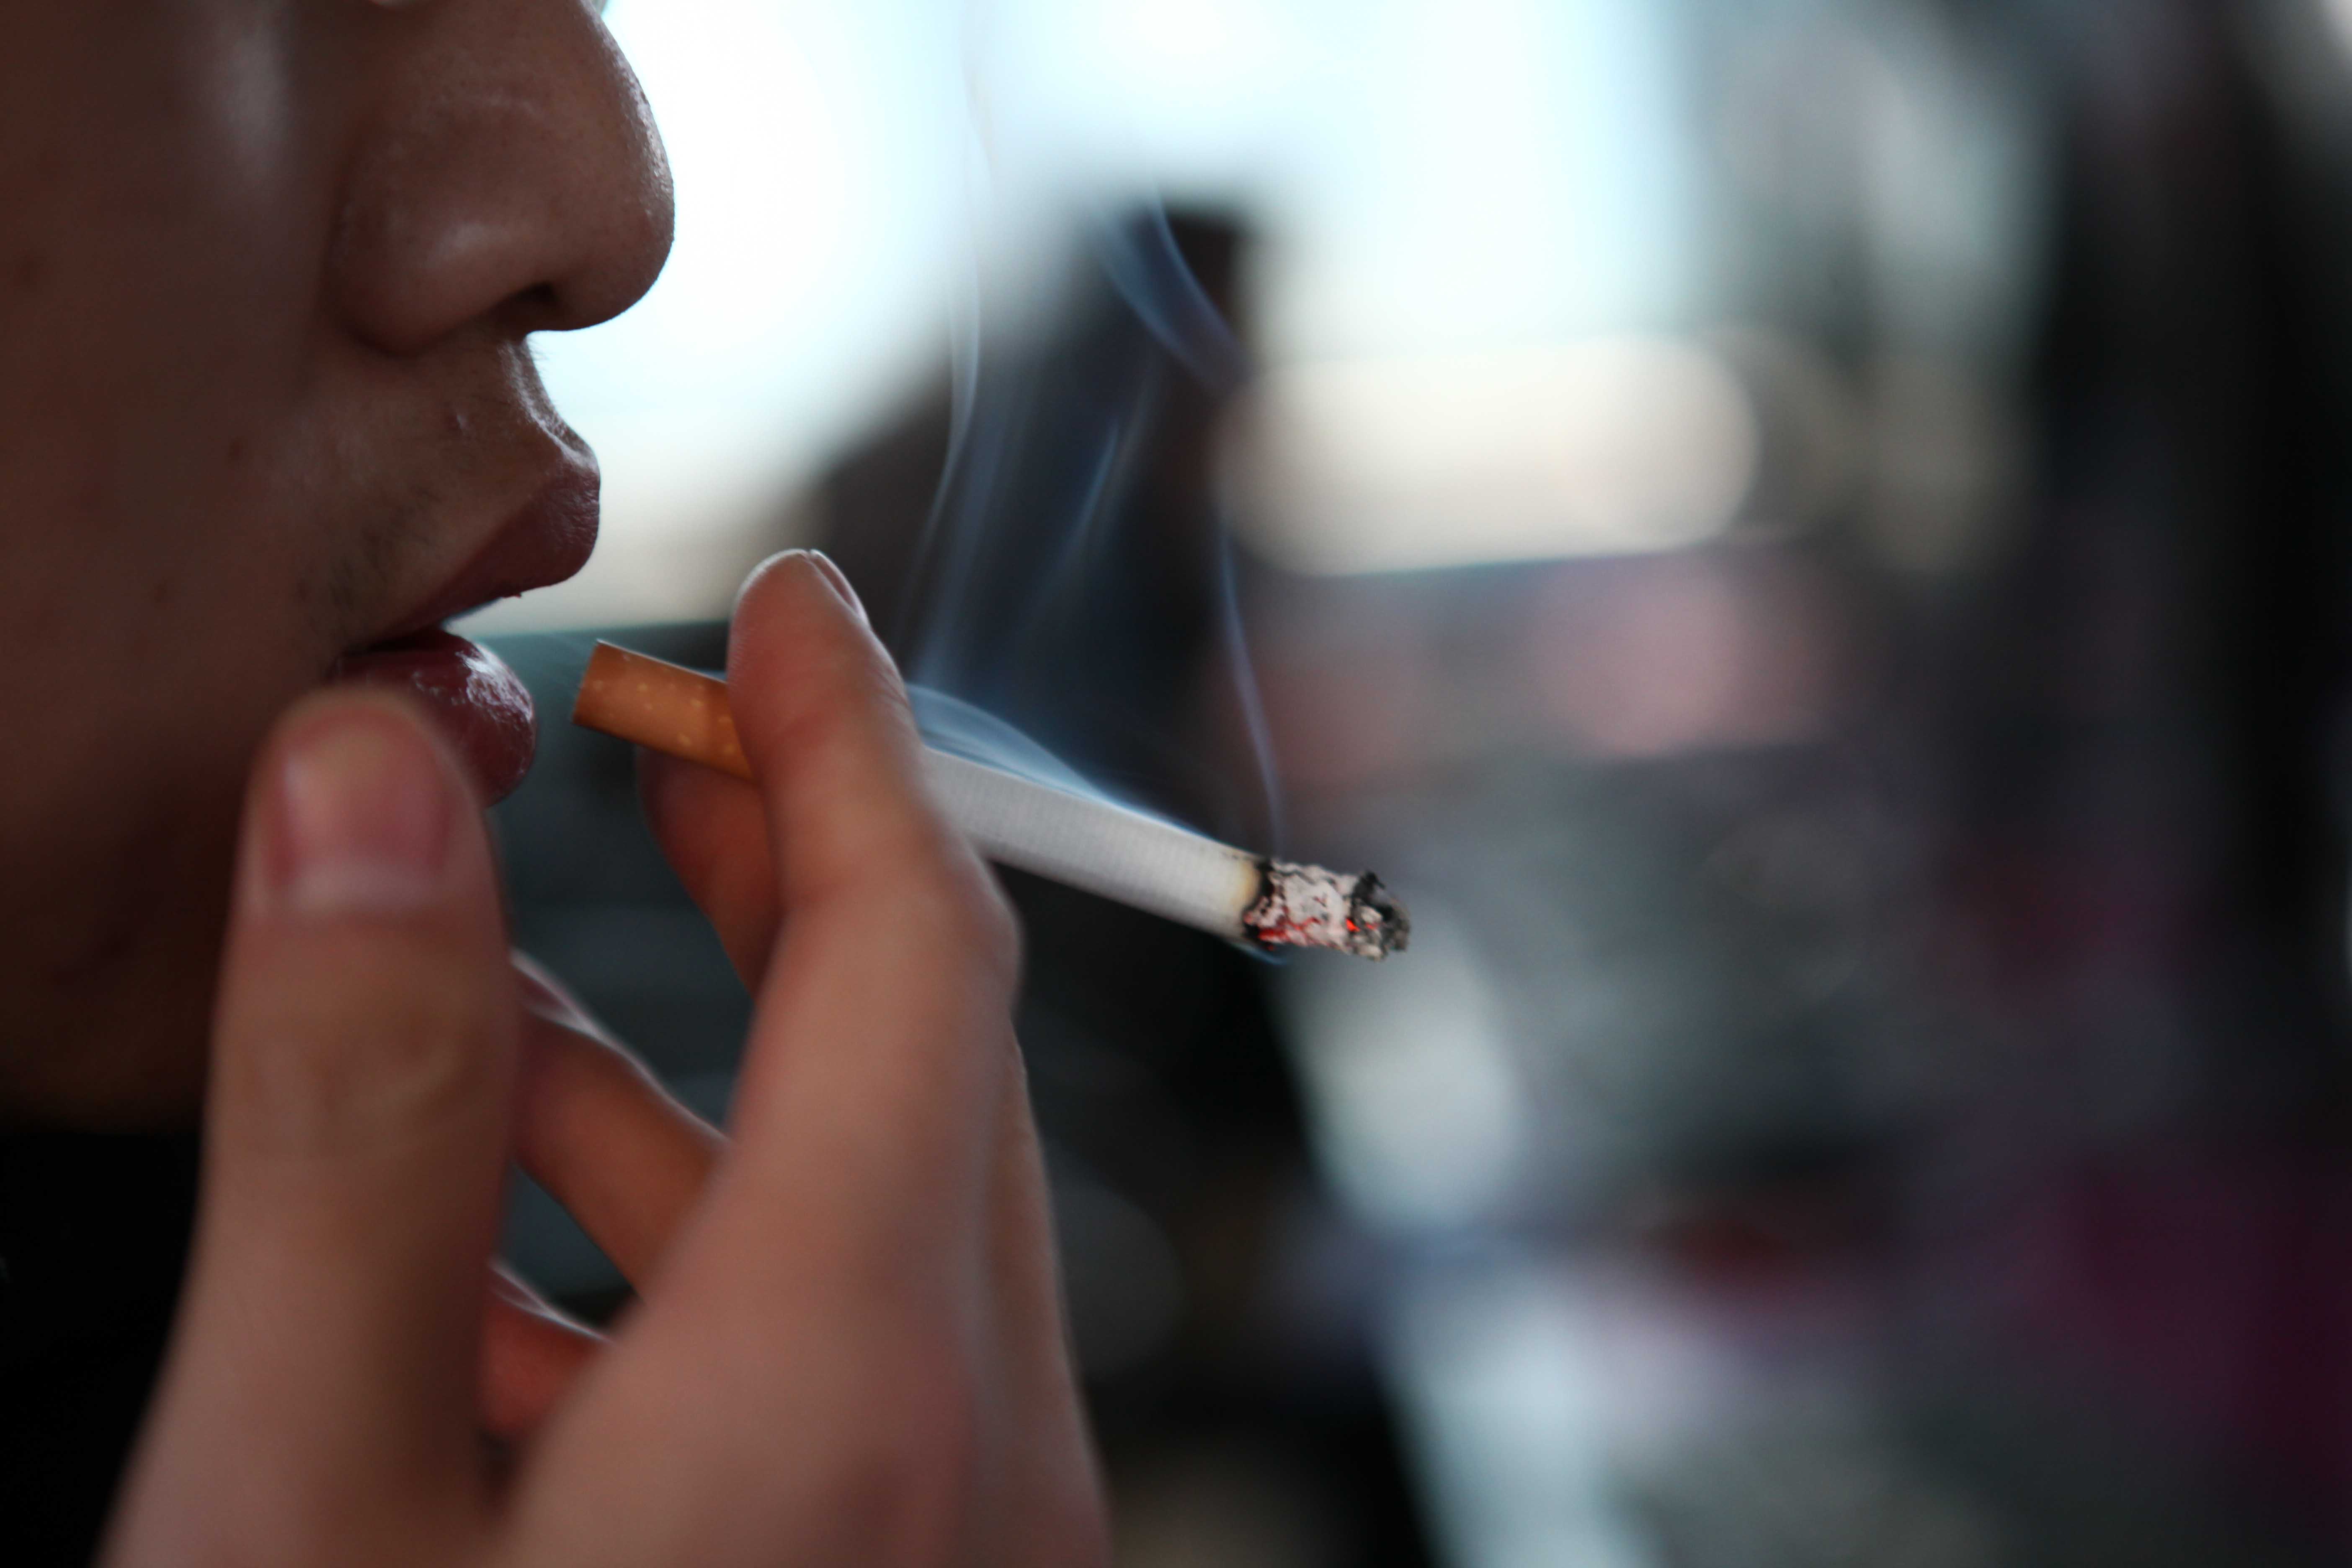 Rising cancer rate leads to calls for smoking controls